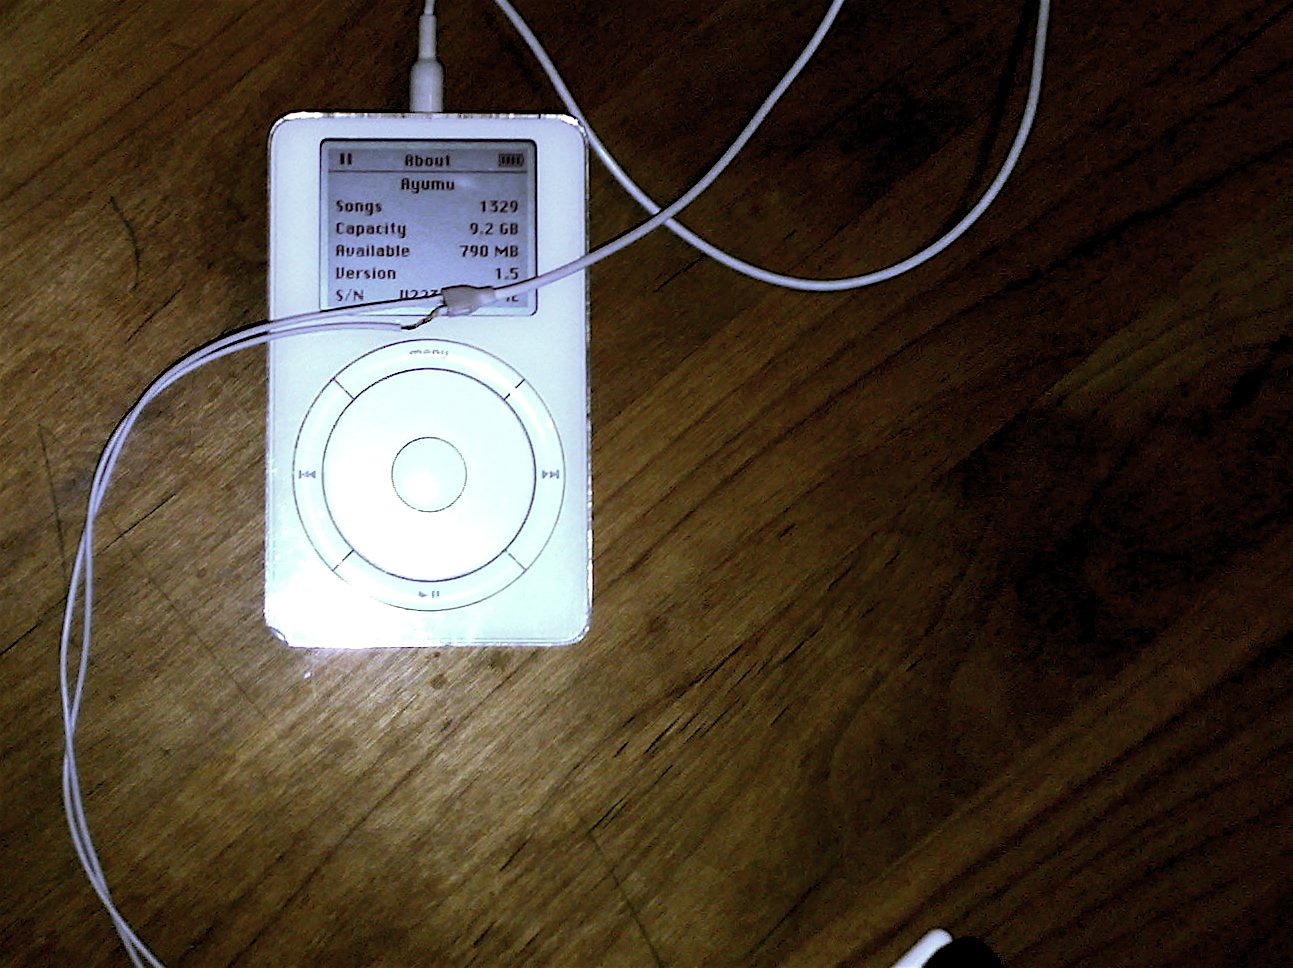 the ipod is connected to a small charger